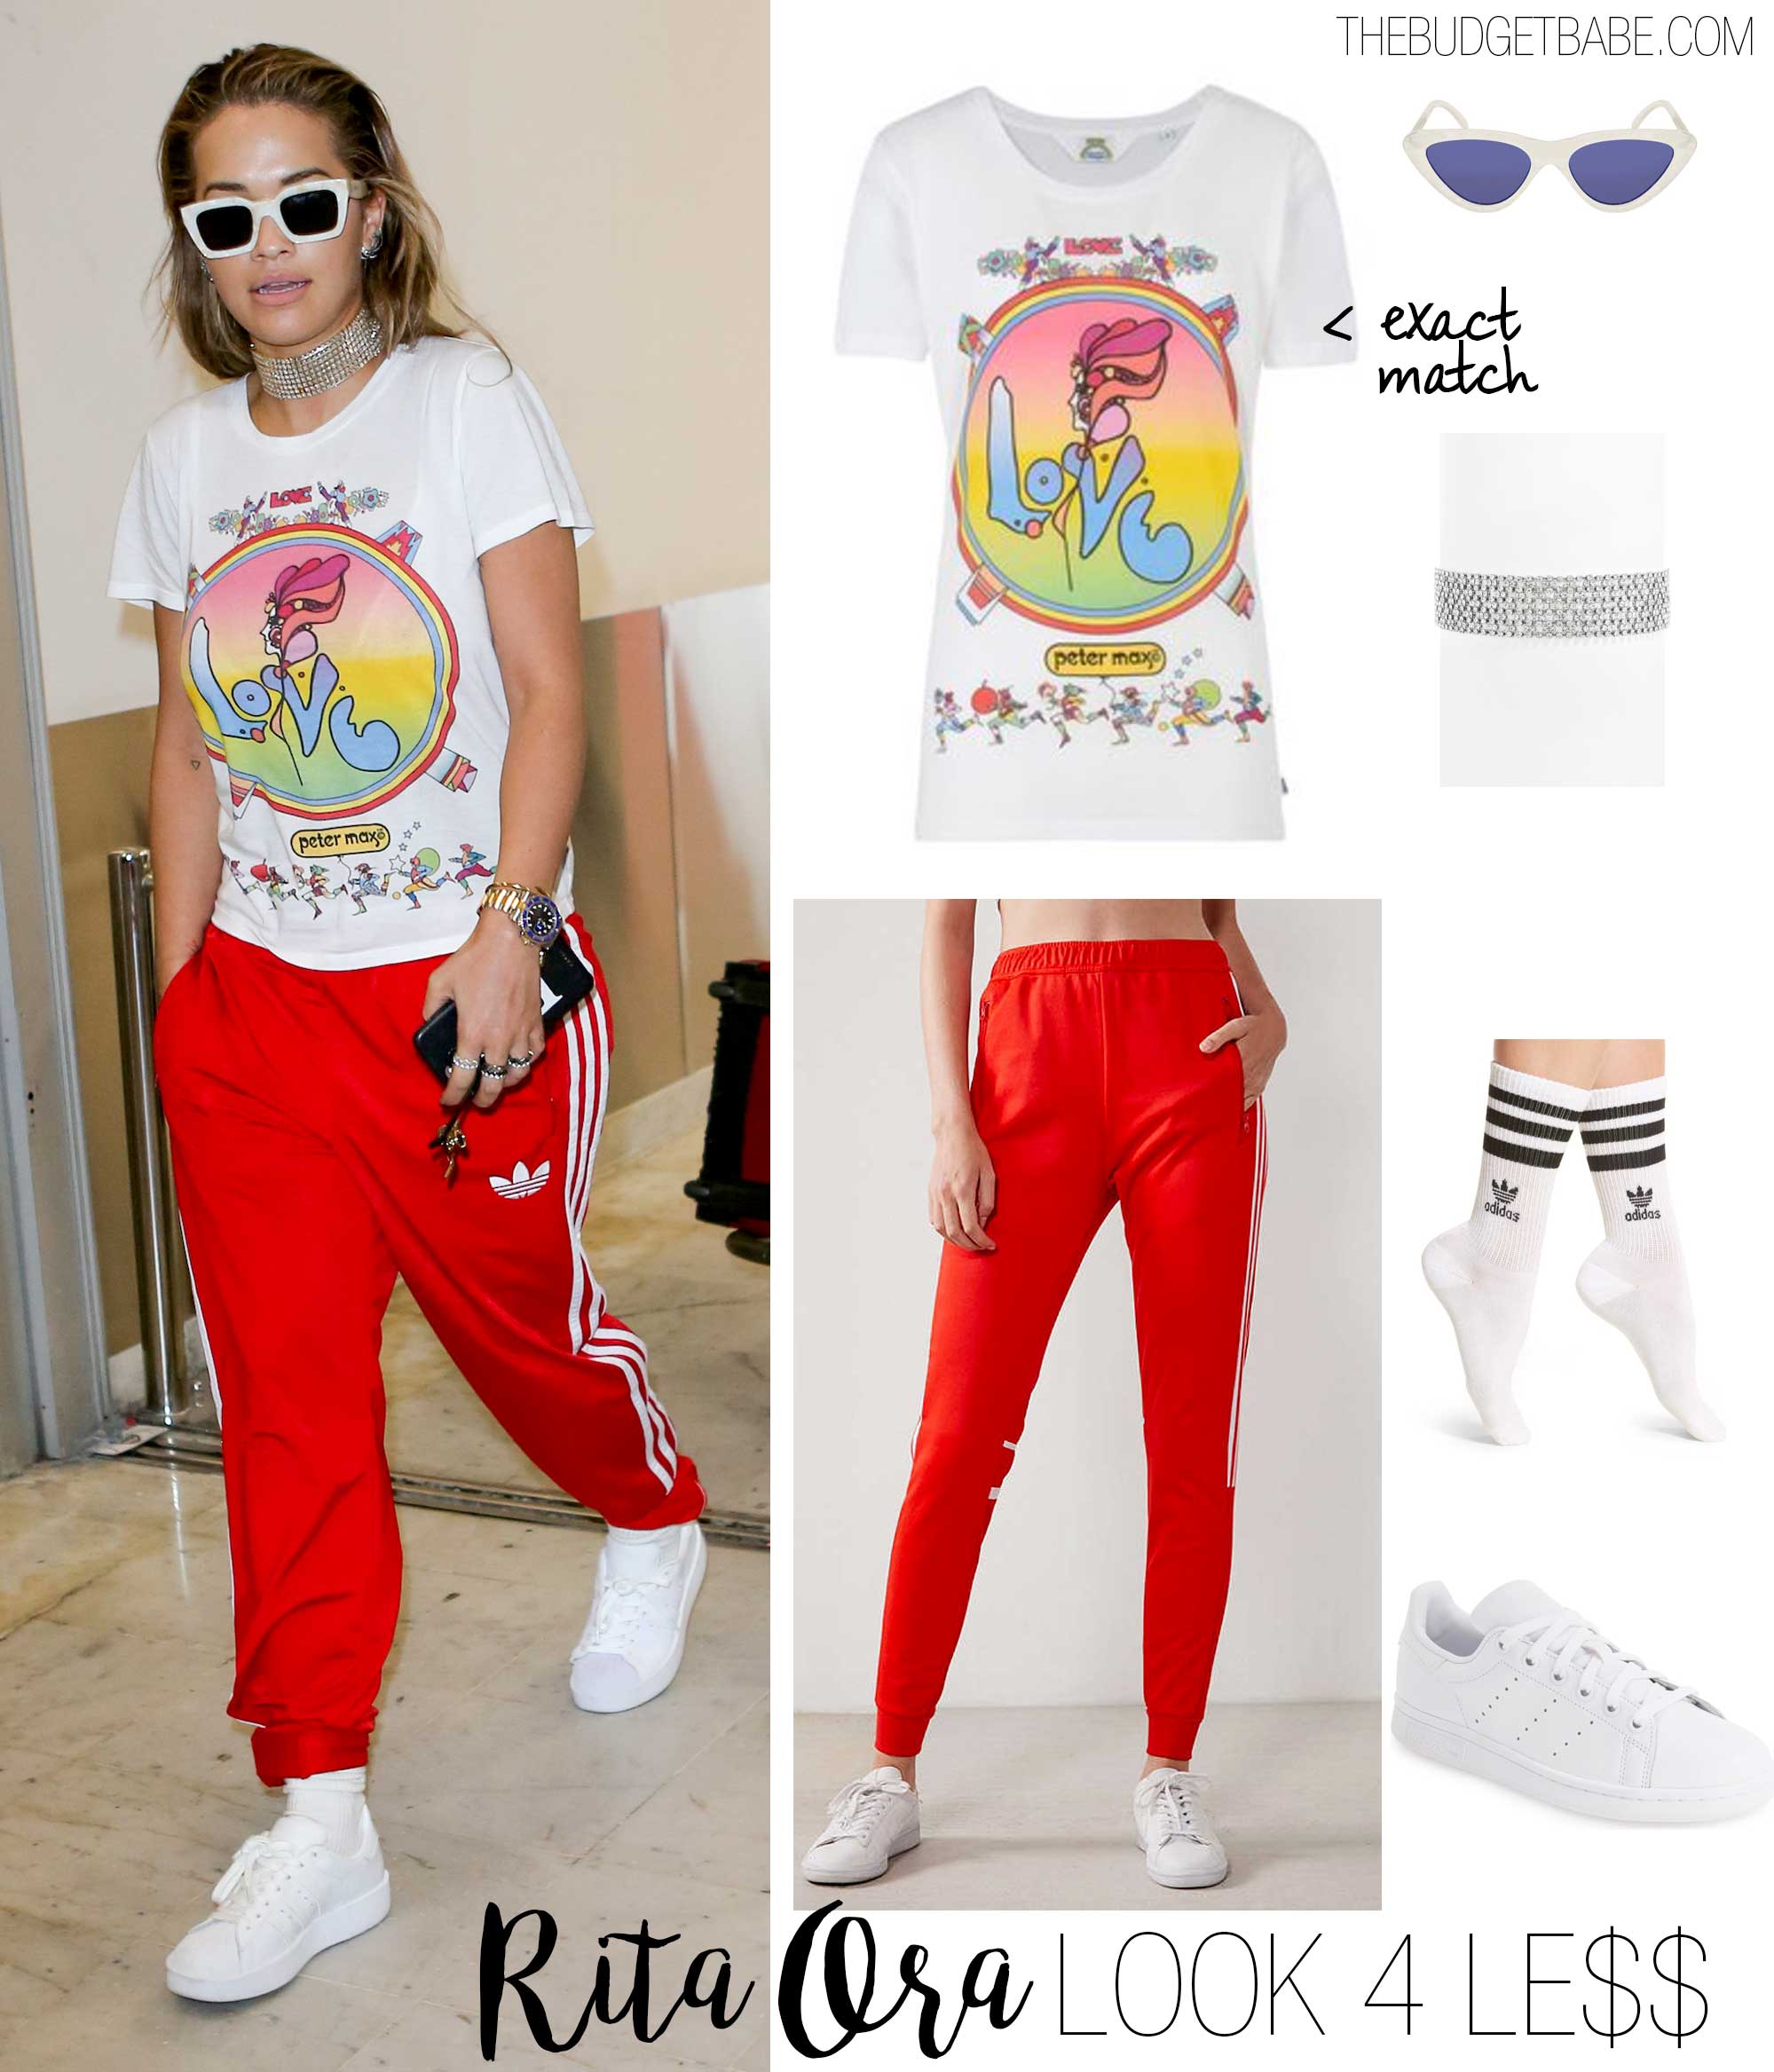 Rita Ora's 'Love' tee and adidas track pants look for less